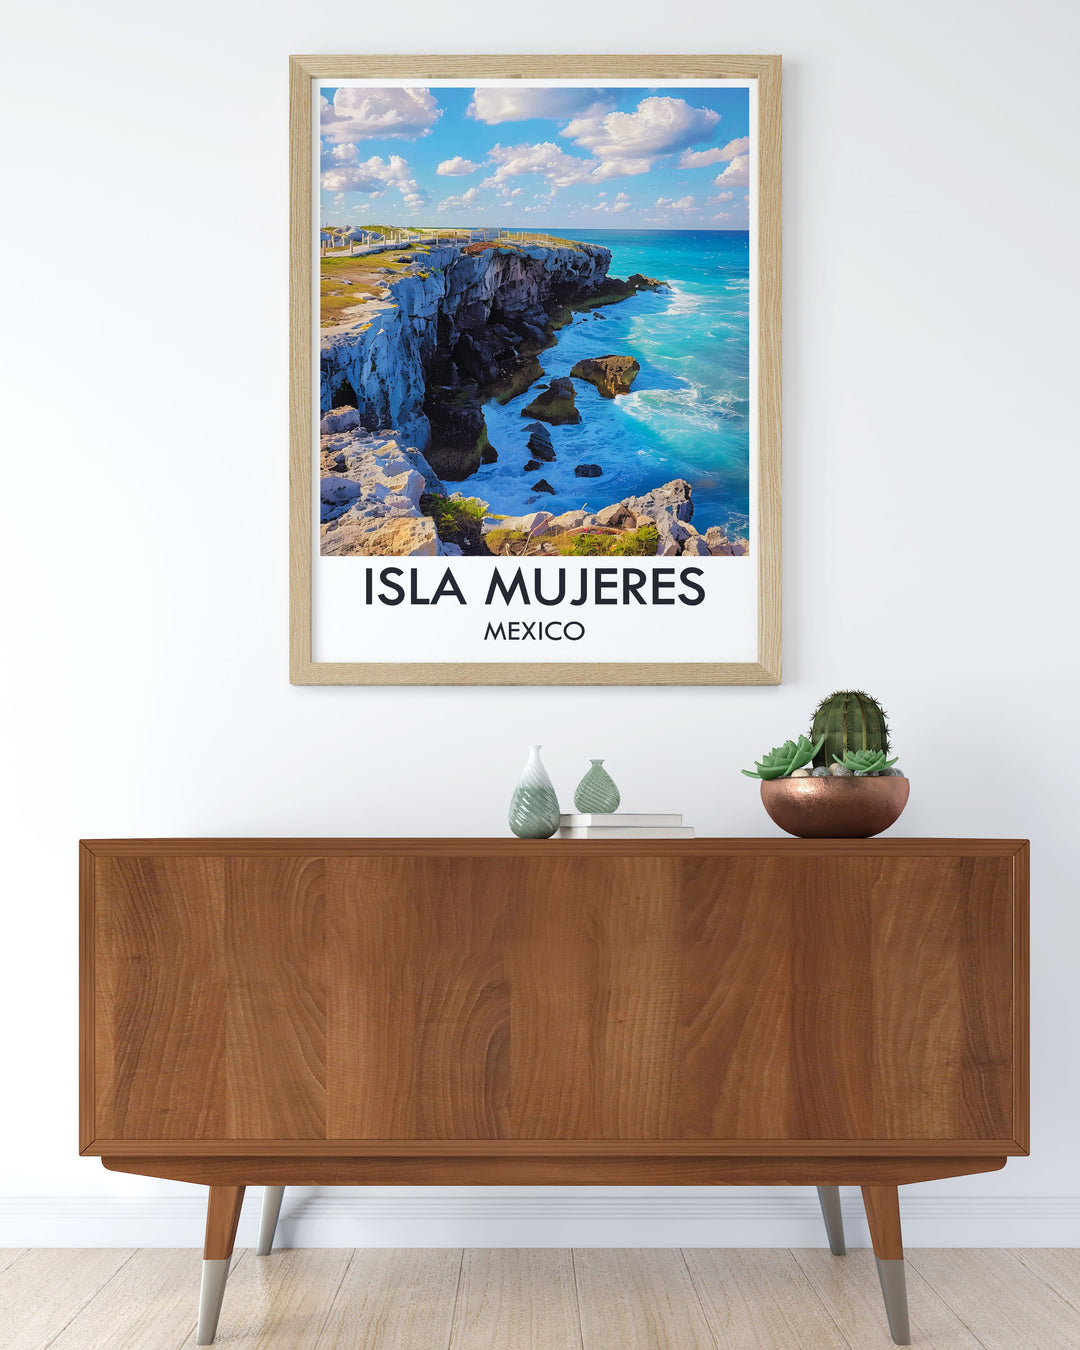 Framed art featuring the captivating beauty of Isla Mujeres, including its vibrant marine life and tranquil beaches, bringing the essence of a tropical paradise into your home.